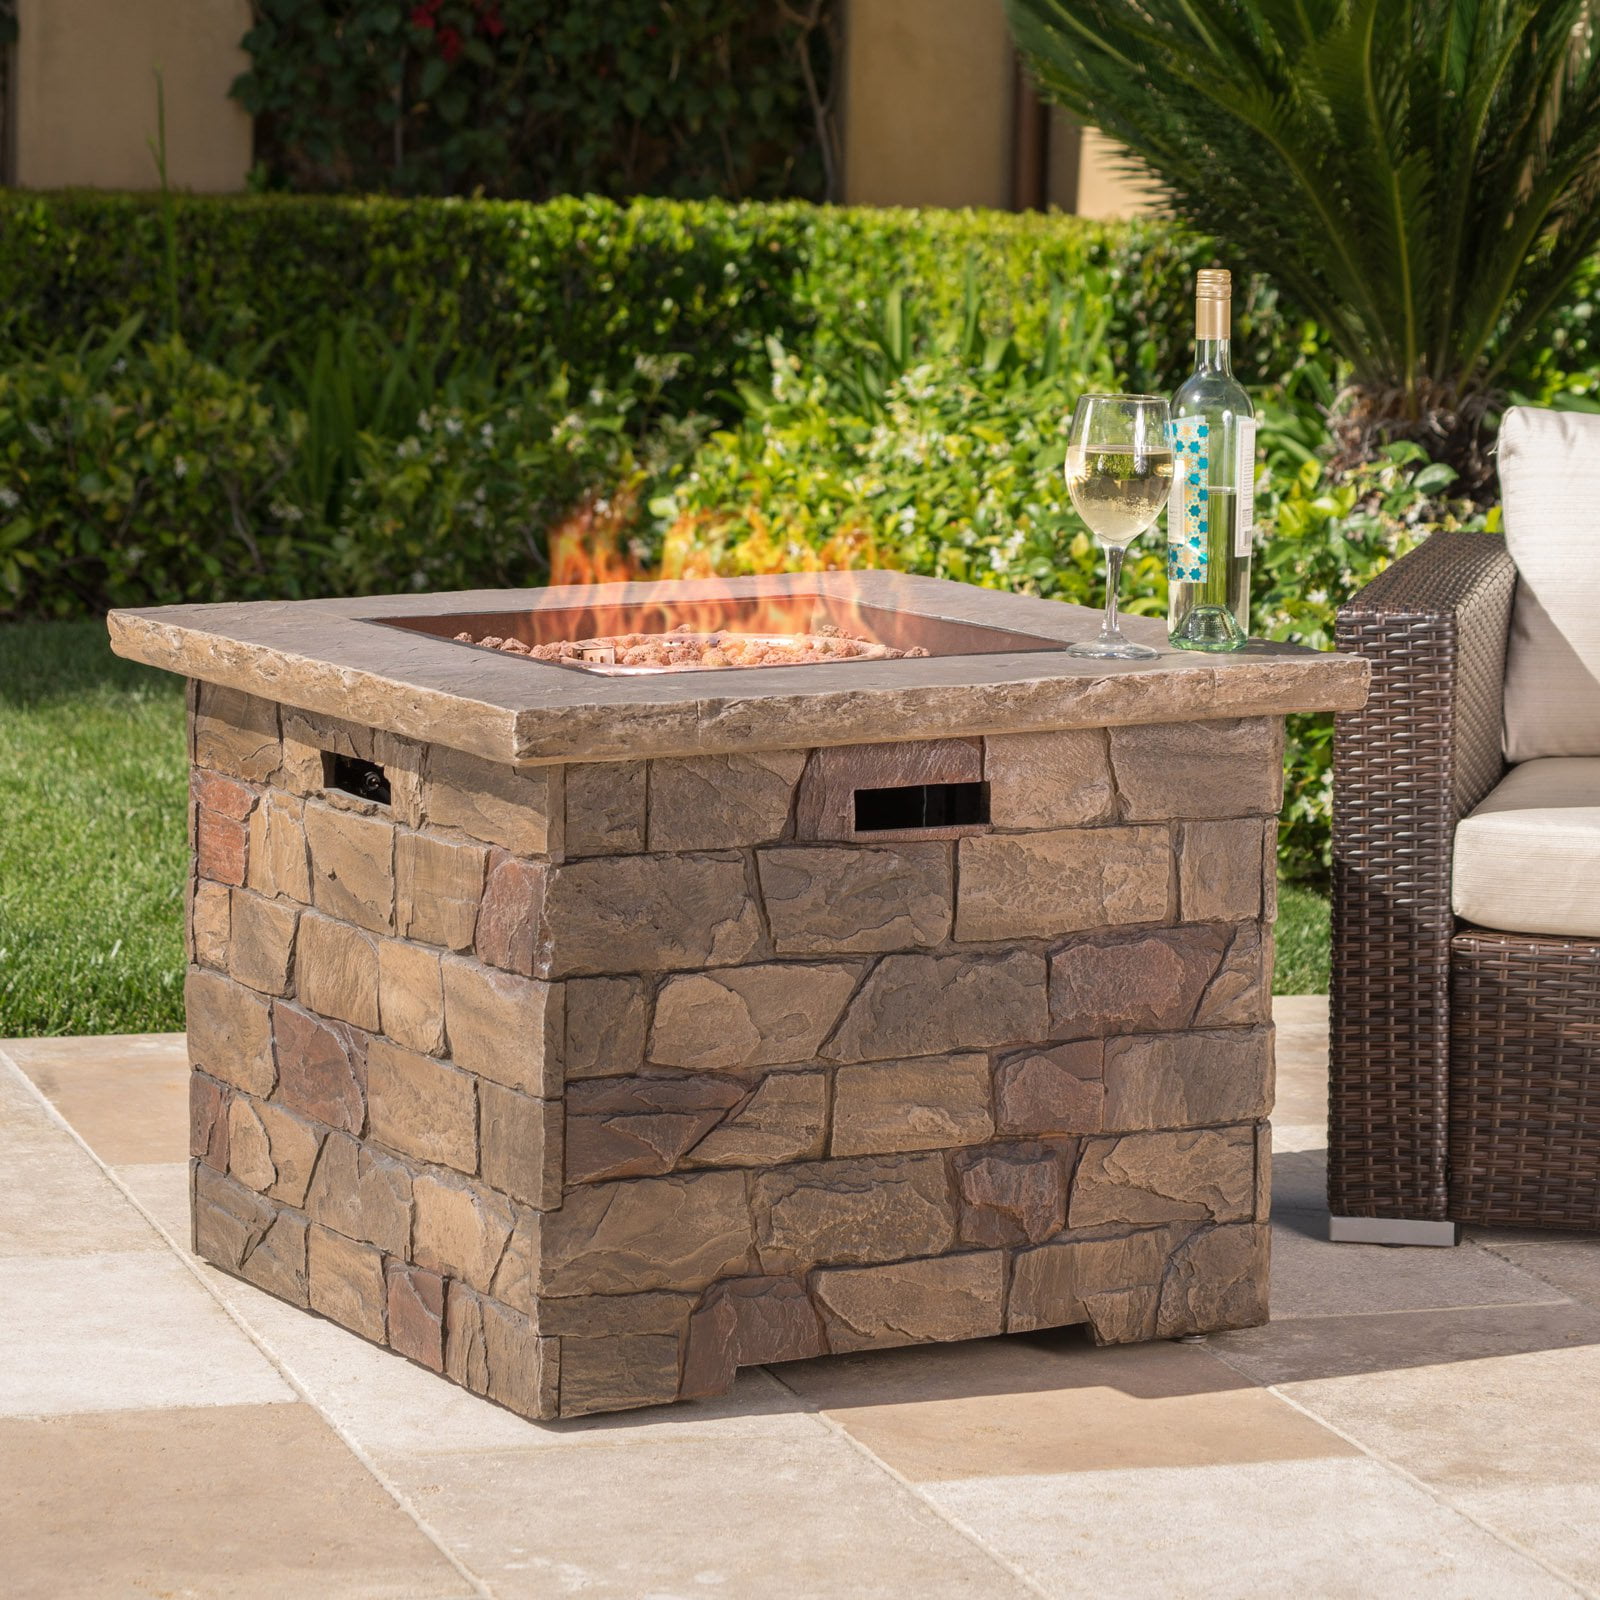 Stillwater Outdoor Square Natural Stone Fire Pit  Walmart 